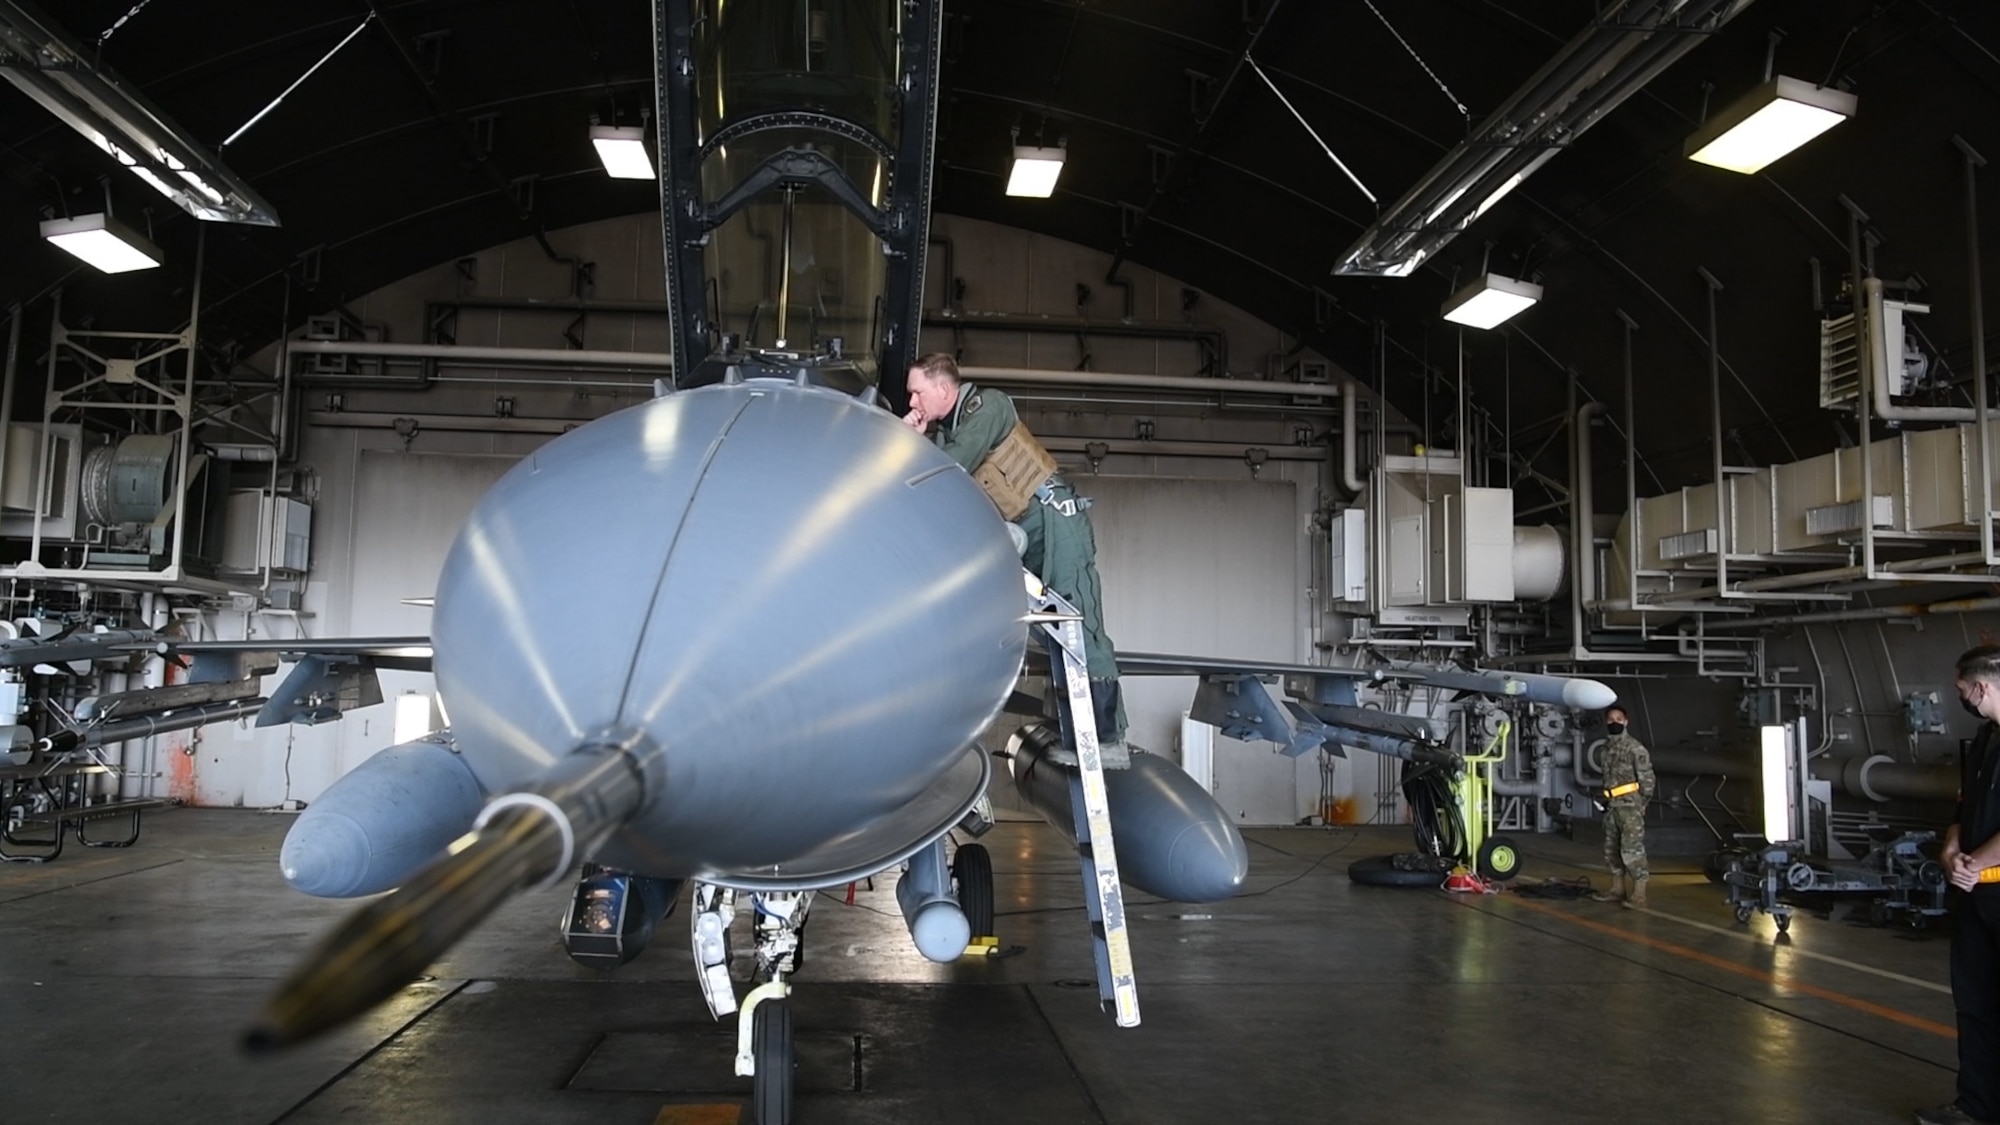 Col Kristopher Struve, 35th Fighter Wing commander, Misawa Air Base, Japan, prepares to execute an air-to-air sortie with Lt Gen Kevin B. Schneider, 5th Air Force commander, April 29, 2020. This training continues amid COVID-19 concerns and mitigation efforts.